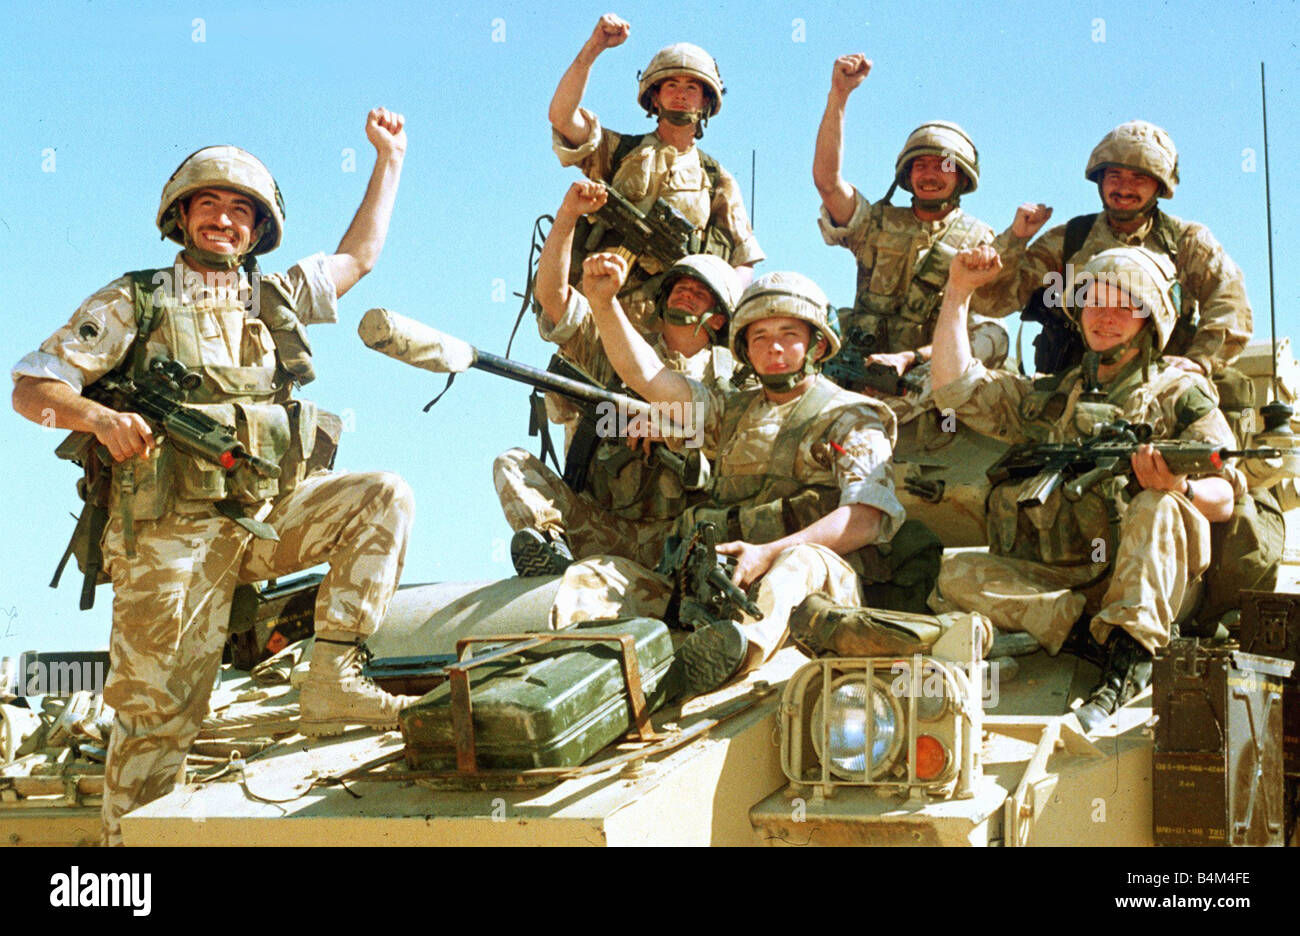 British infantrymen celebrate on a Warrior Armoured Personnel Carrier during the Gulf Crisis in January 1991 Stock Photo